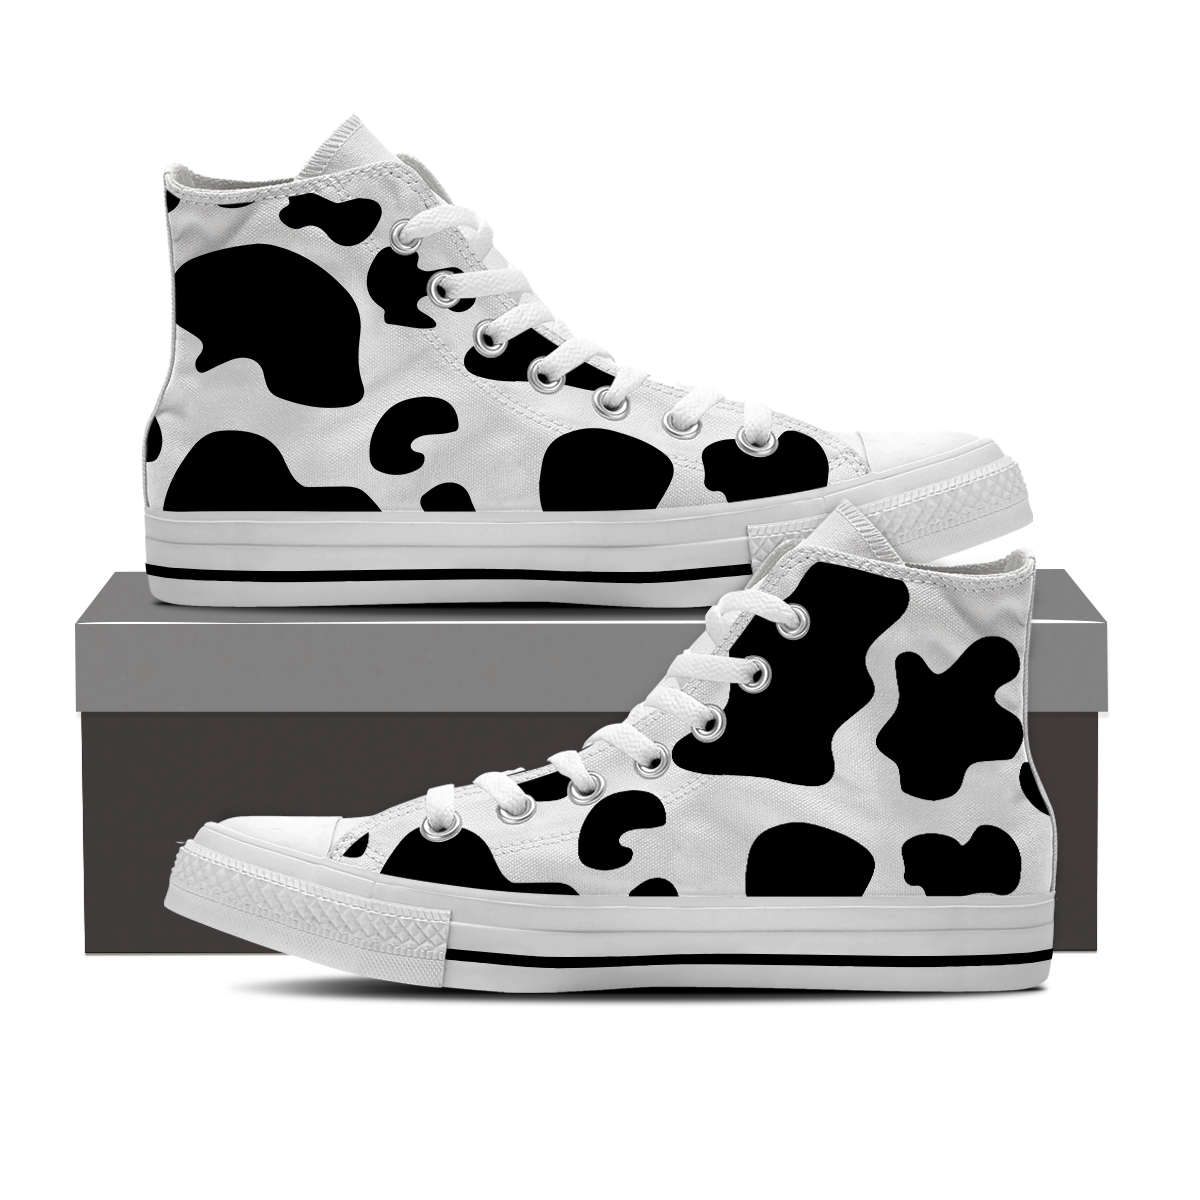 COW HIGHTOP SHOES